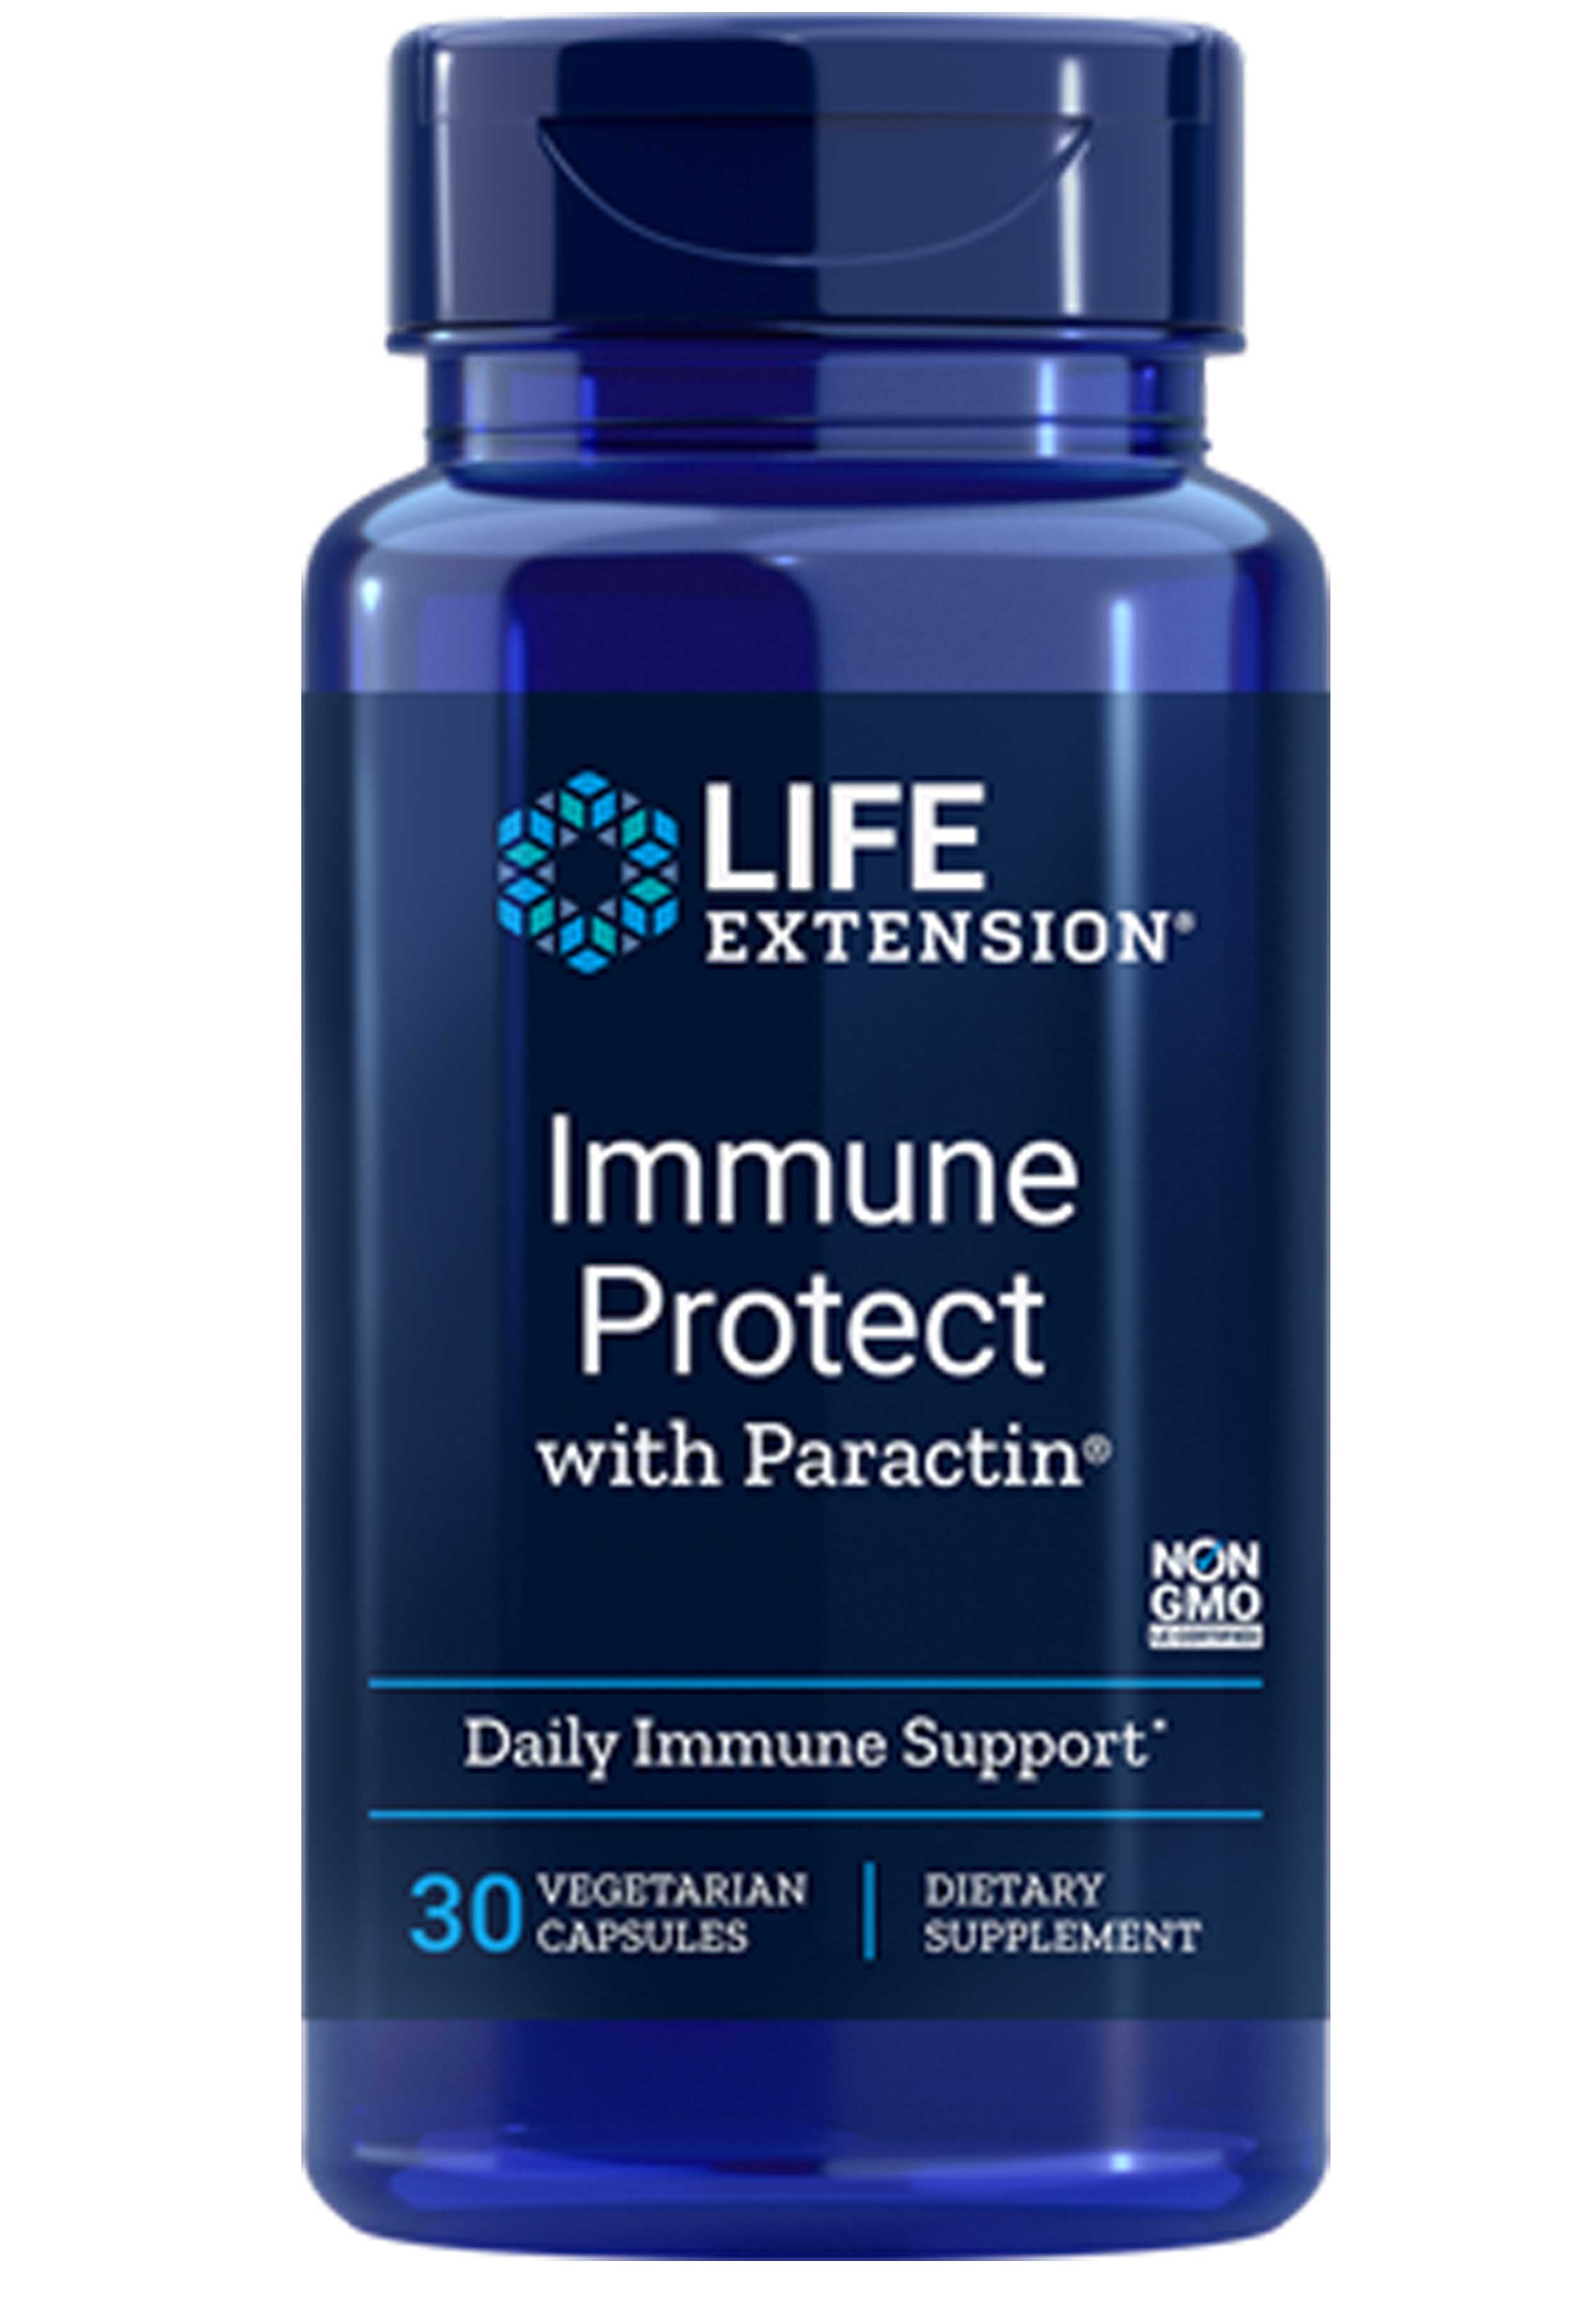 Life Extension Immune Protect with PARACTIN